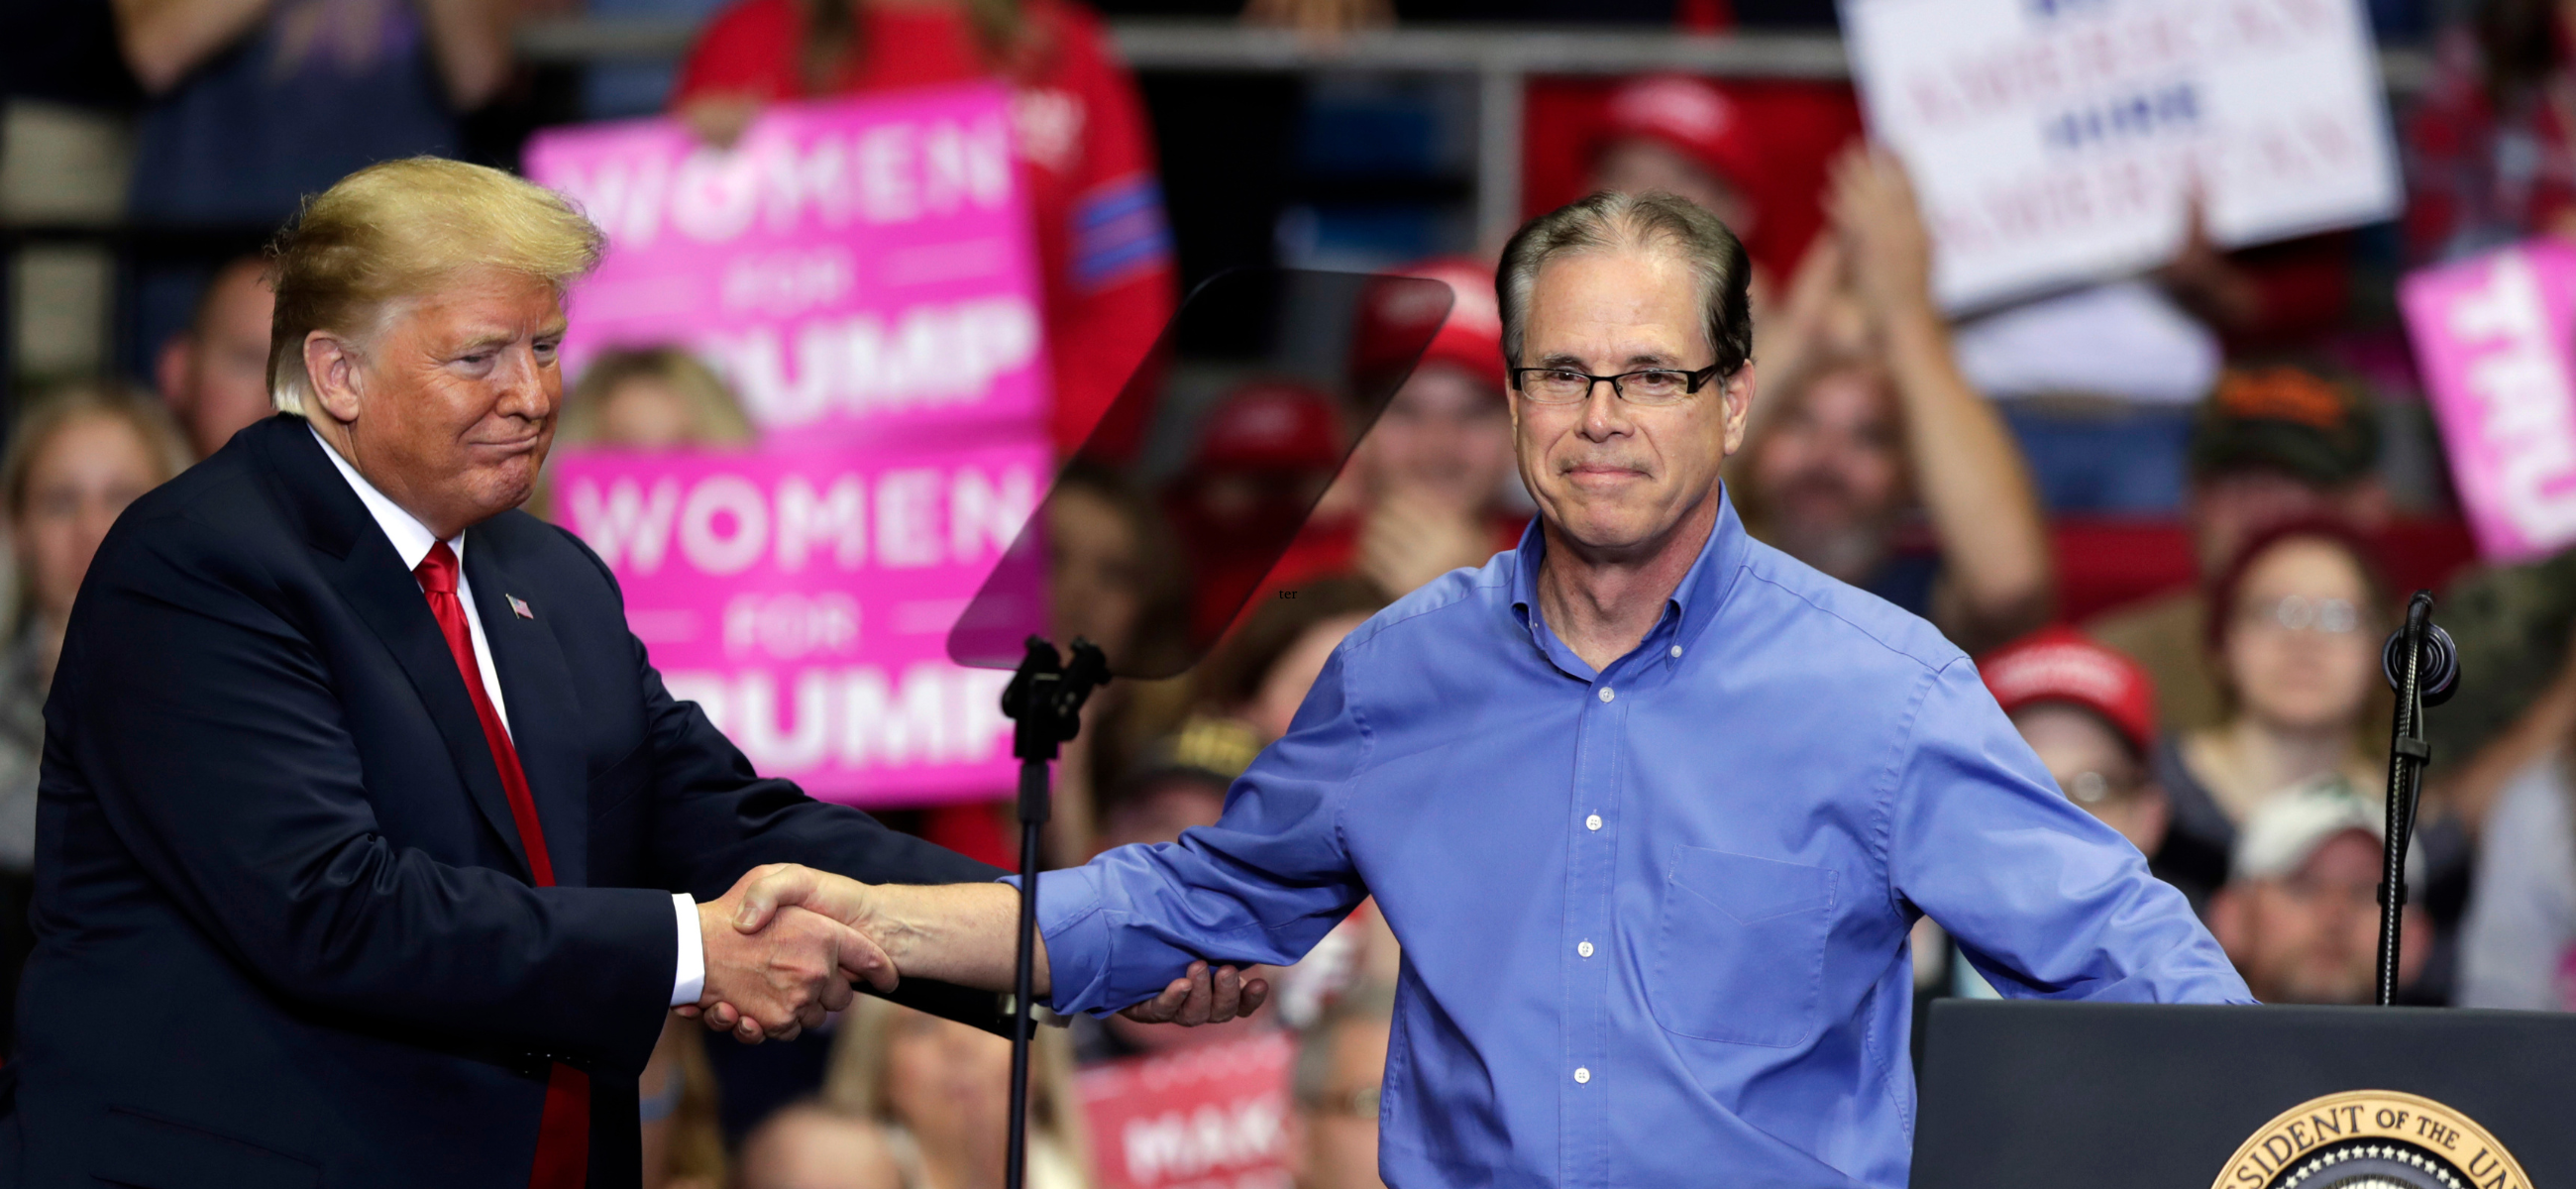 President Donald Trump greets Senate candidate Mike Braun at a campaign rally at the Allen County War Memorial Coliseum in Fort Wayne in 2018. (Credit: Michael Conroy)